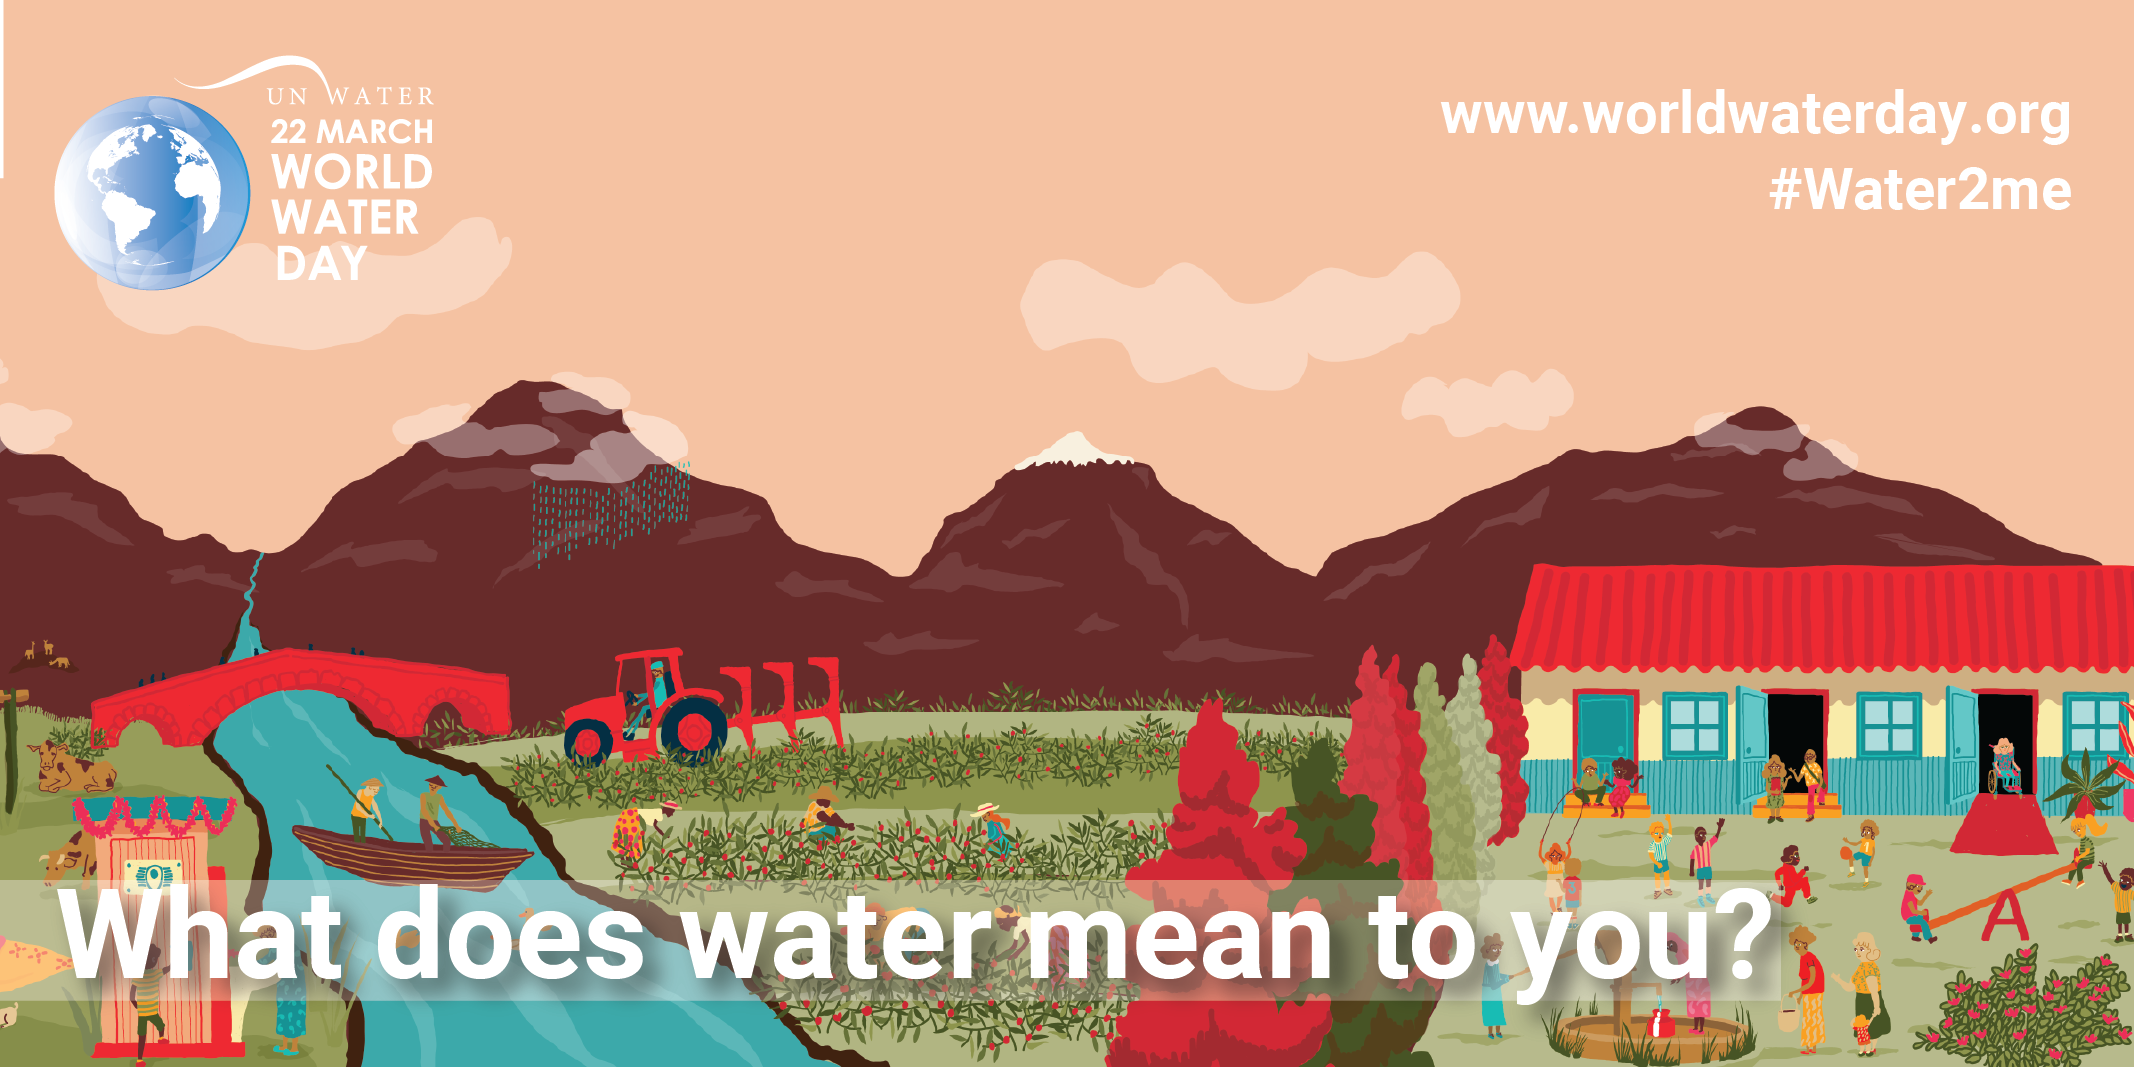 UN Water banner image for World Water Day overlaid with text 'What does water mean to you?'